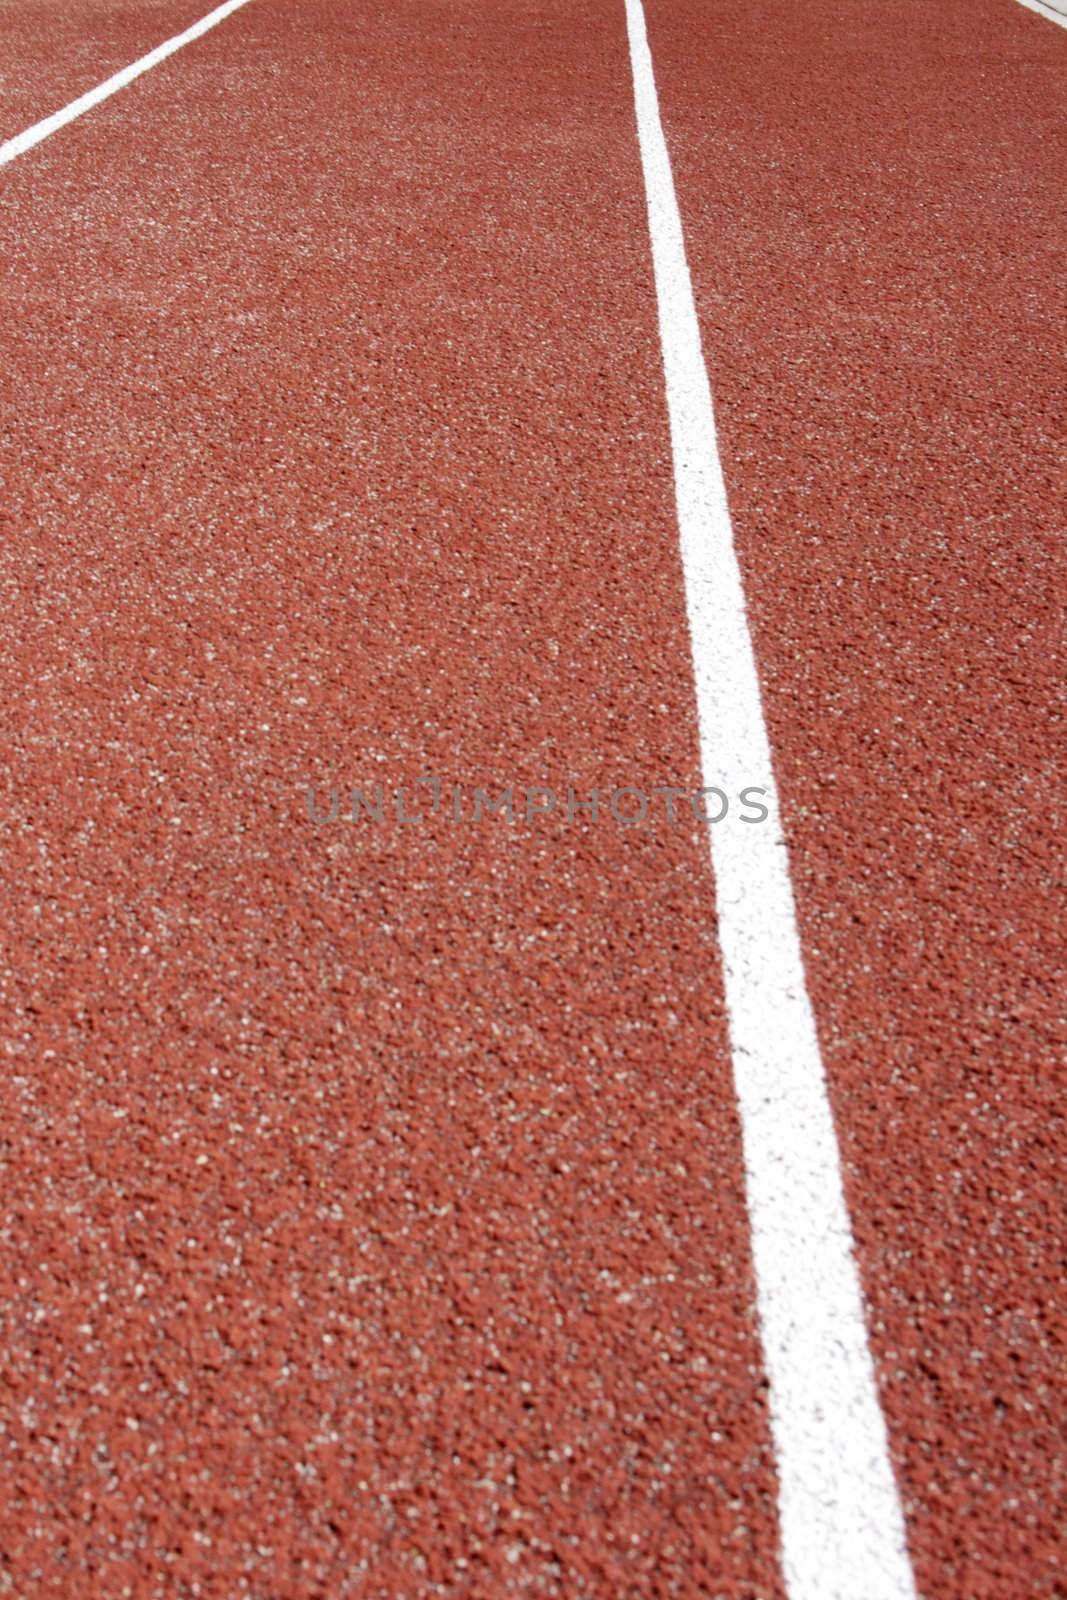 Track and field by Teamarbeit